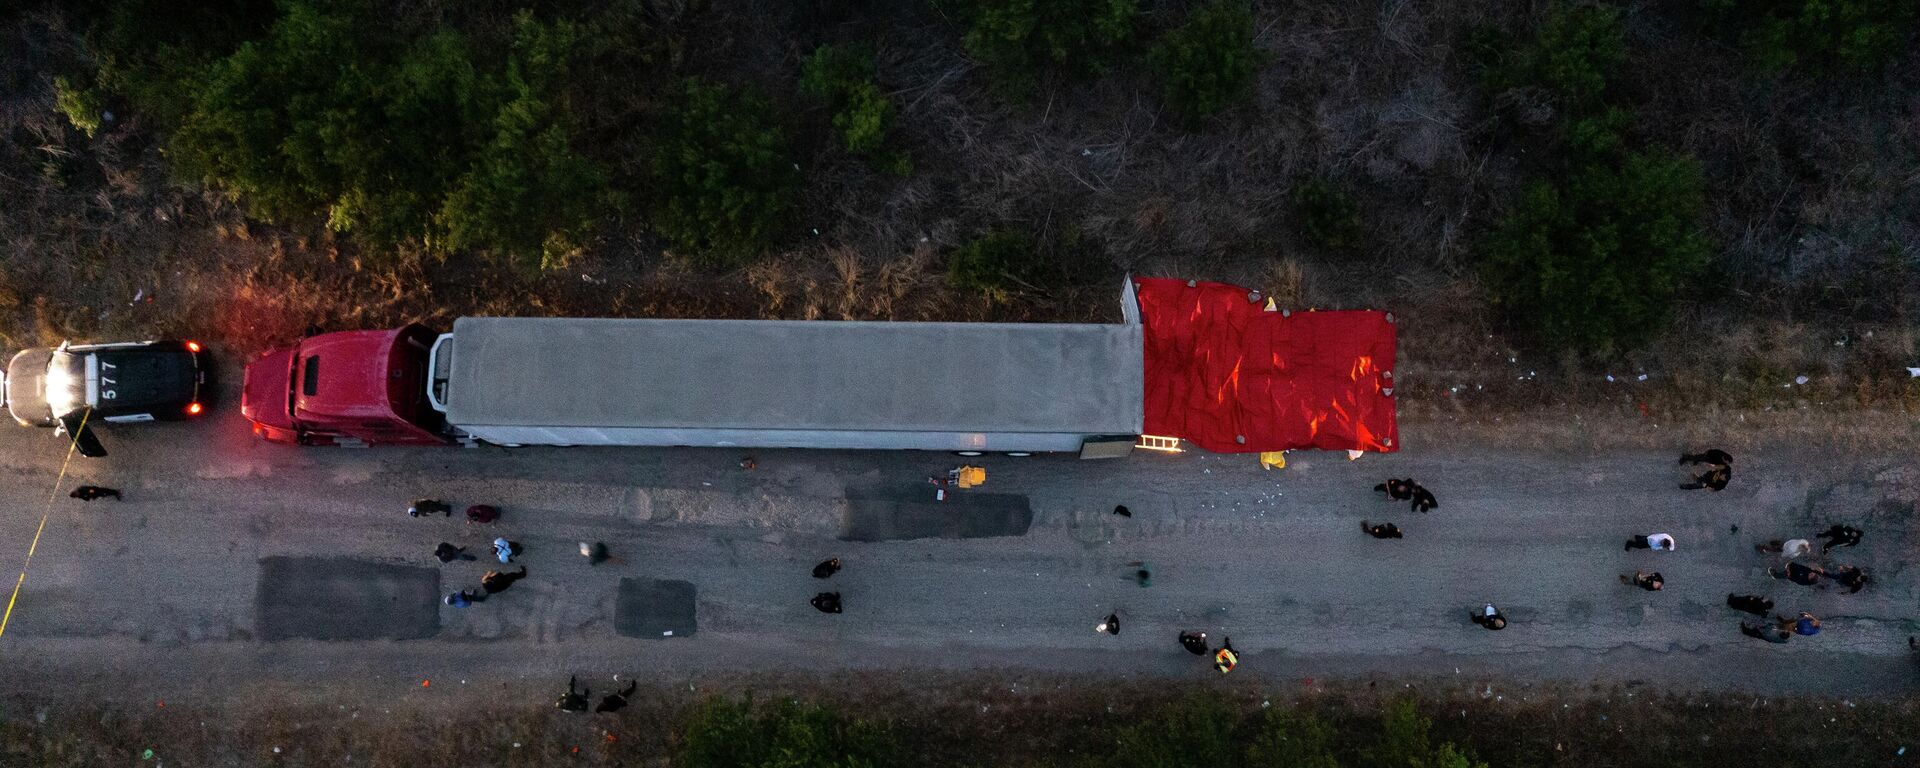 In this aerial view, members of law enforcement investigate a tractor trailer on June 27, 2022 in San Antonio, Texas. According to reports, at least 46 people, who are believed migrant workers from Mexico, were found dead in an abandoned tractor trailer. - Sputnik International, 1920, 28.06.2022